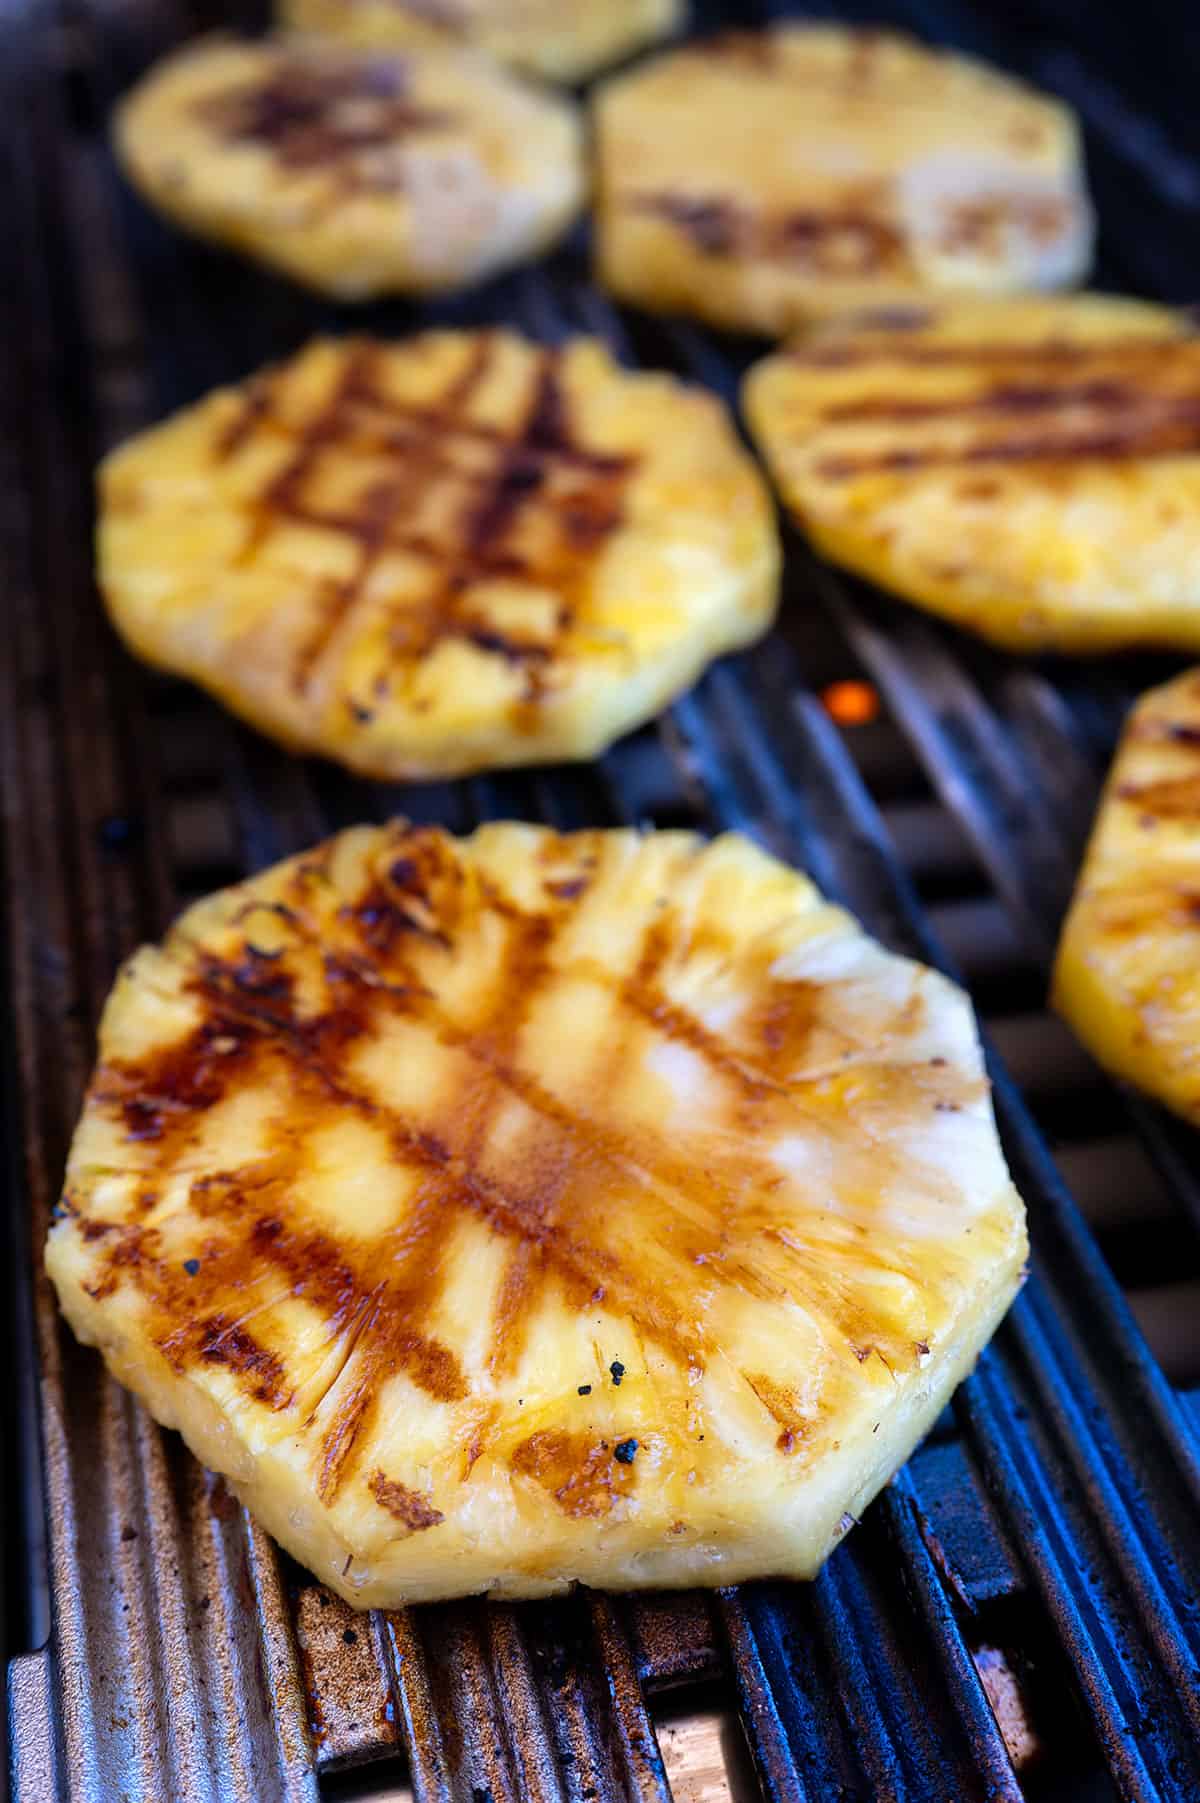 Grilled pineapple slices.